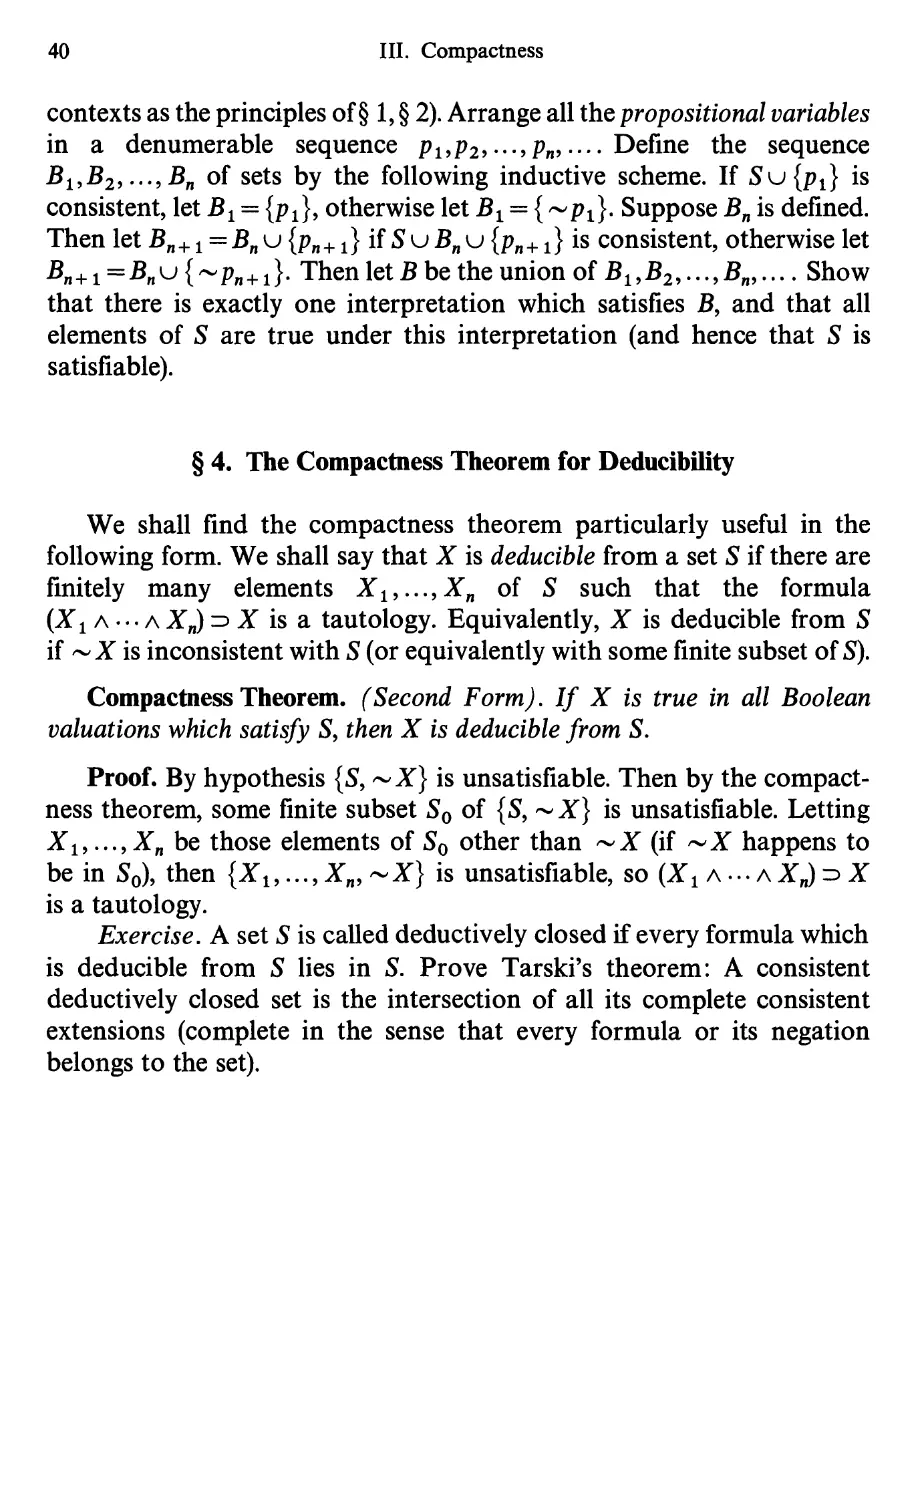 3.4 The Compactness Theorem for Deducibility